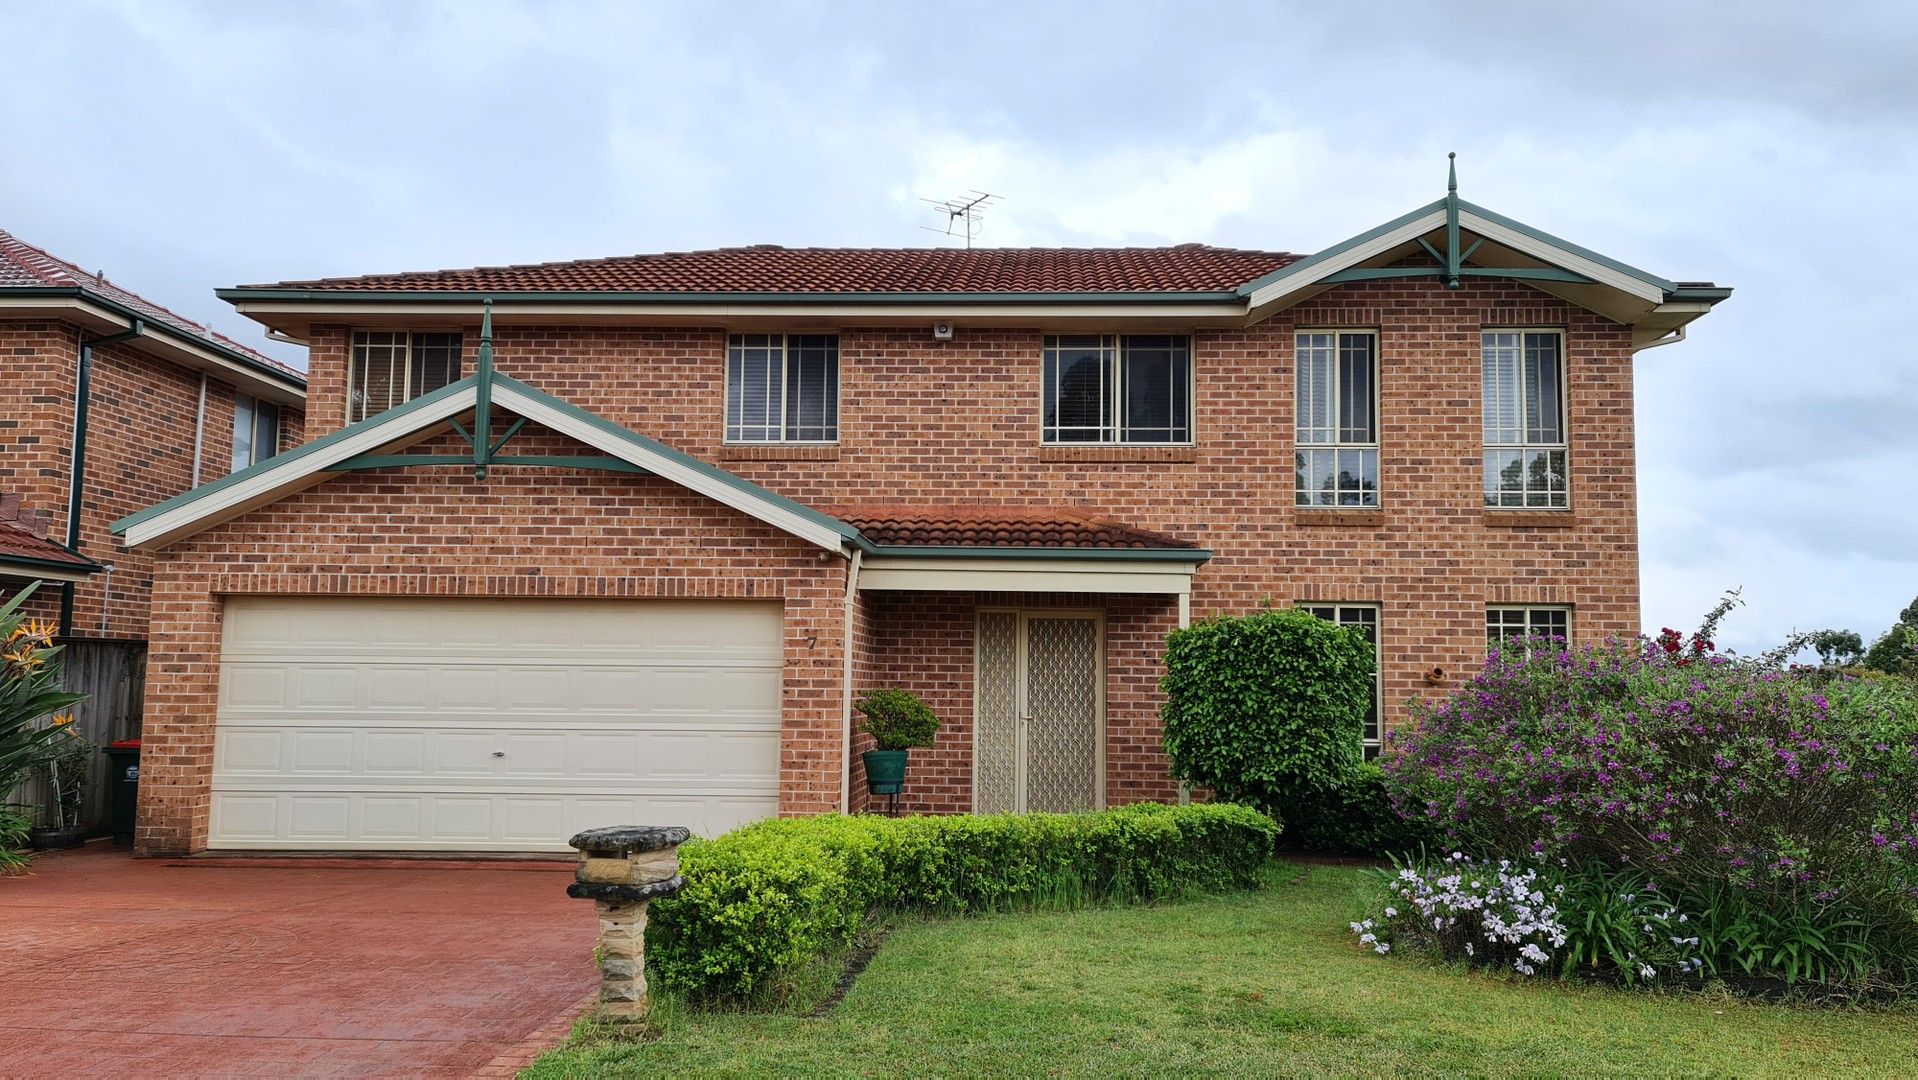 4 bedrooms House in 7 Tanners Way KELLYVILLE NSW, 2155